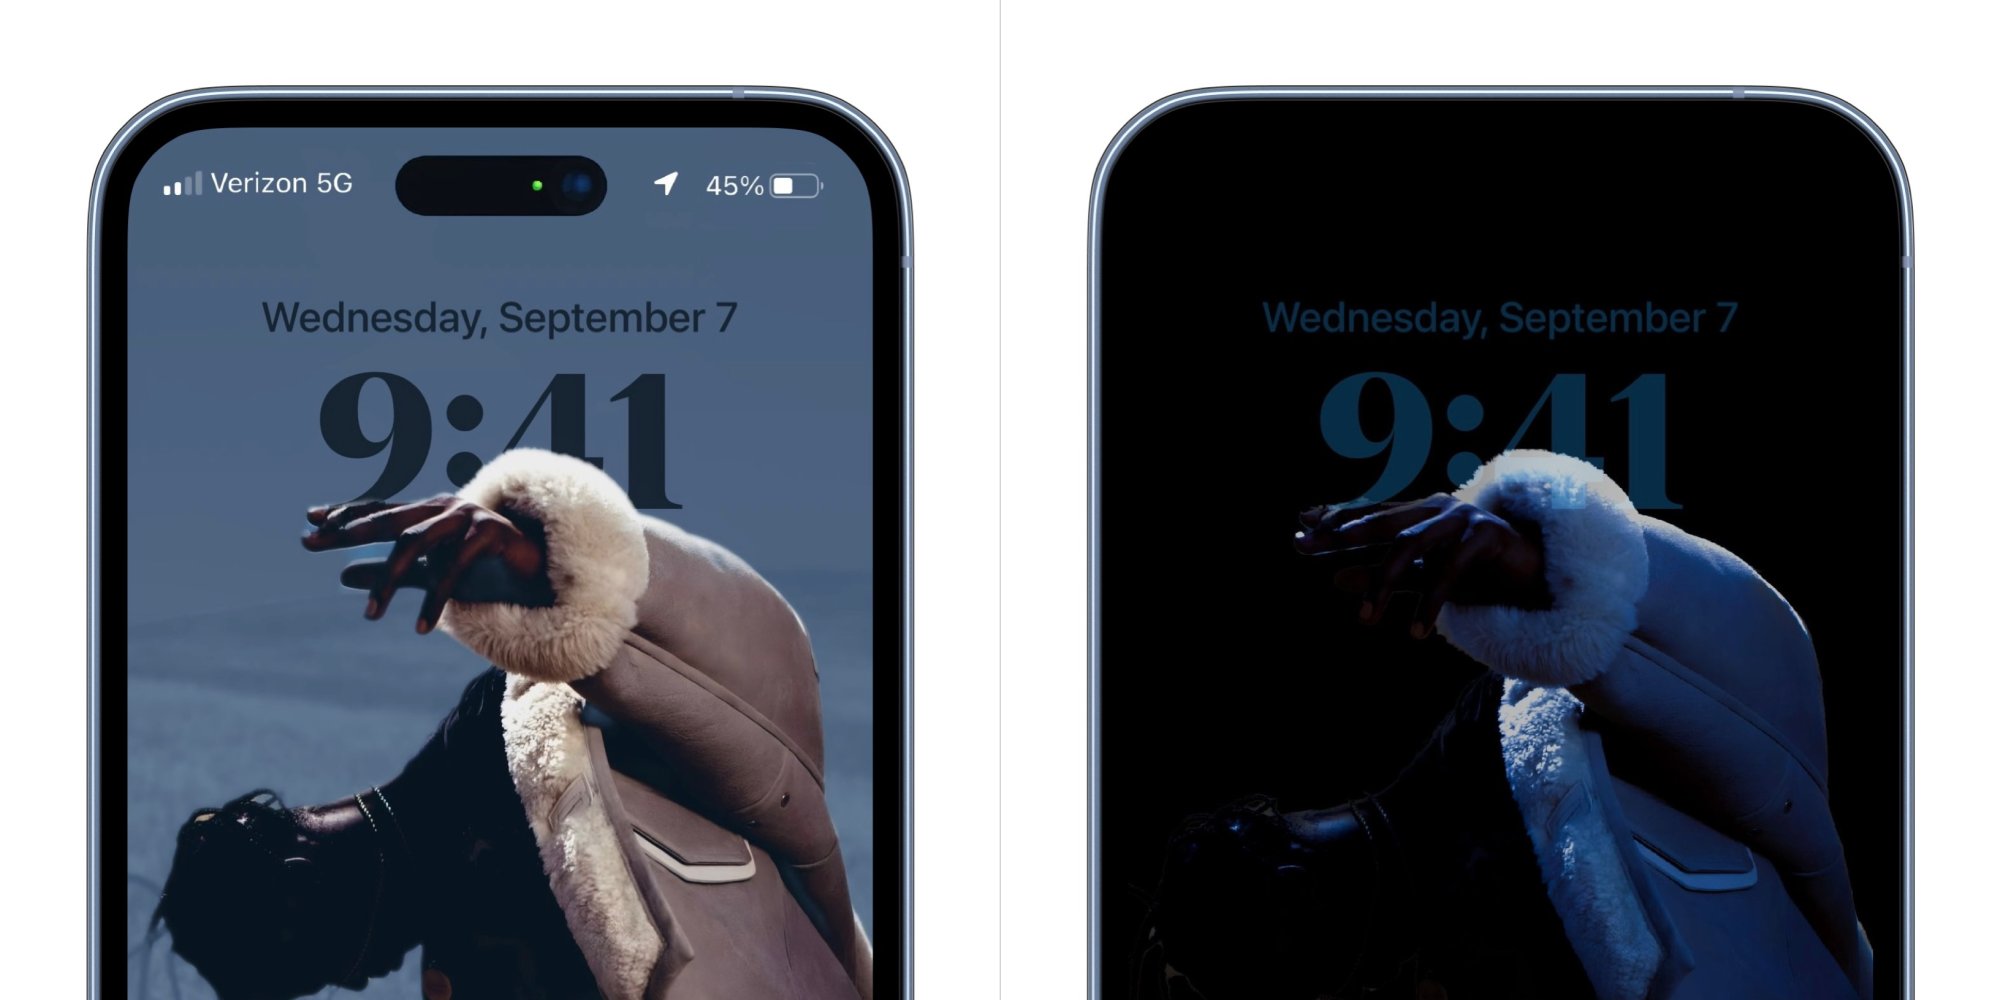 iPhone 14 Pro’s Always-On Display Behavior in iOS 16 Allegedly Revealed Days Ahead of Unveiling